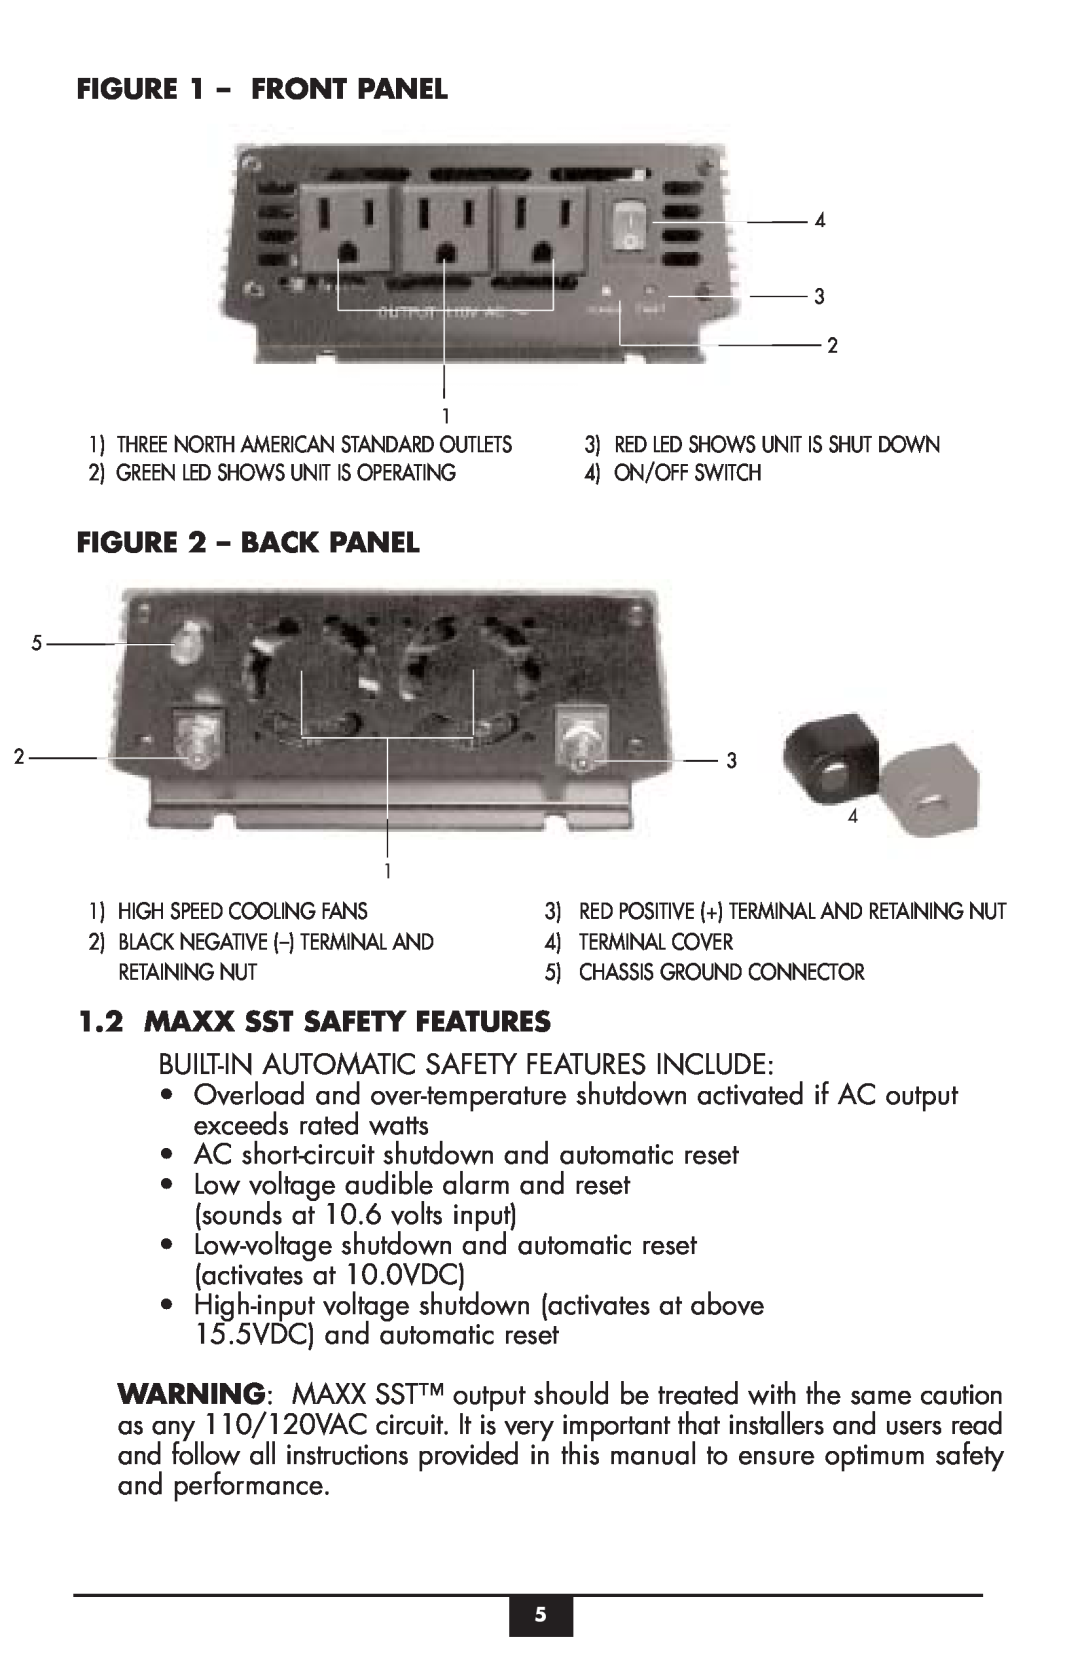 Vector VEC049C owner manual Front Panel, Back Panel, Maxx Sst Safety Features 